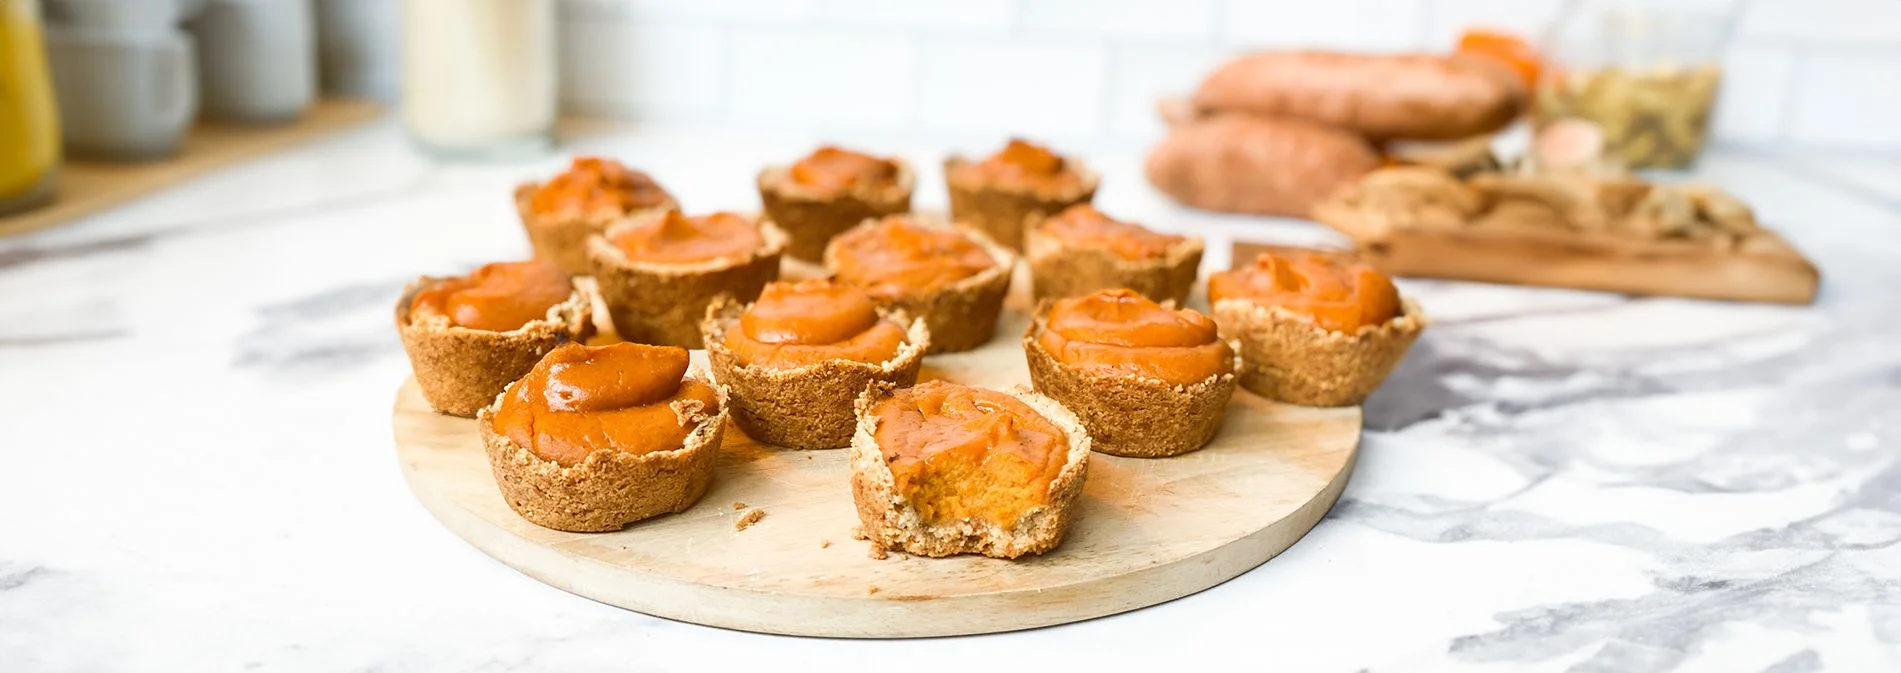 Front view of sweet potato tarts arranged on a circular wooden board. A bite is taken out of one tart.